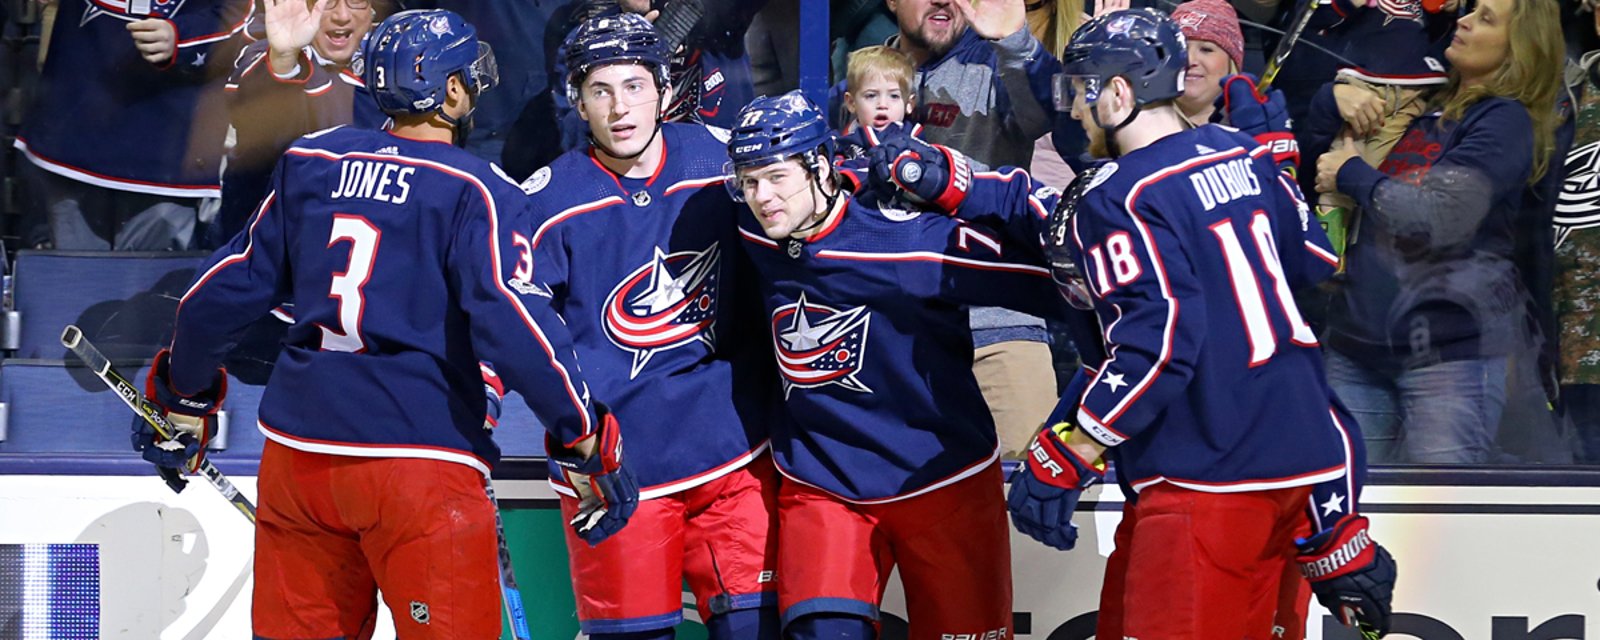 Rumor: Two Canadian teams talking trade with Blue Jackets